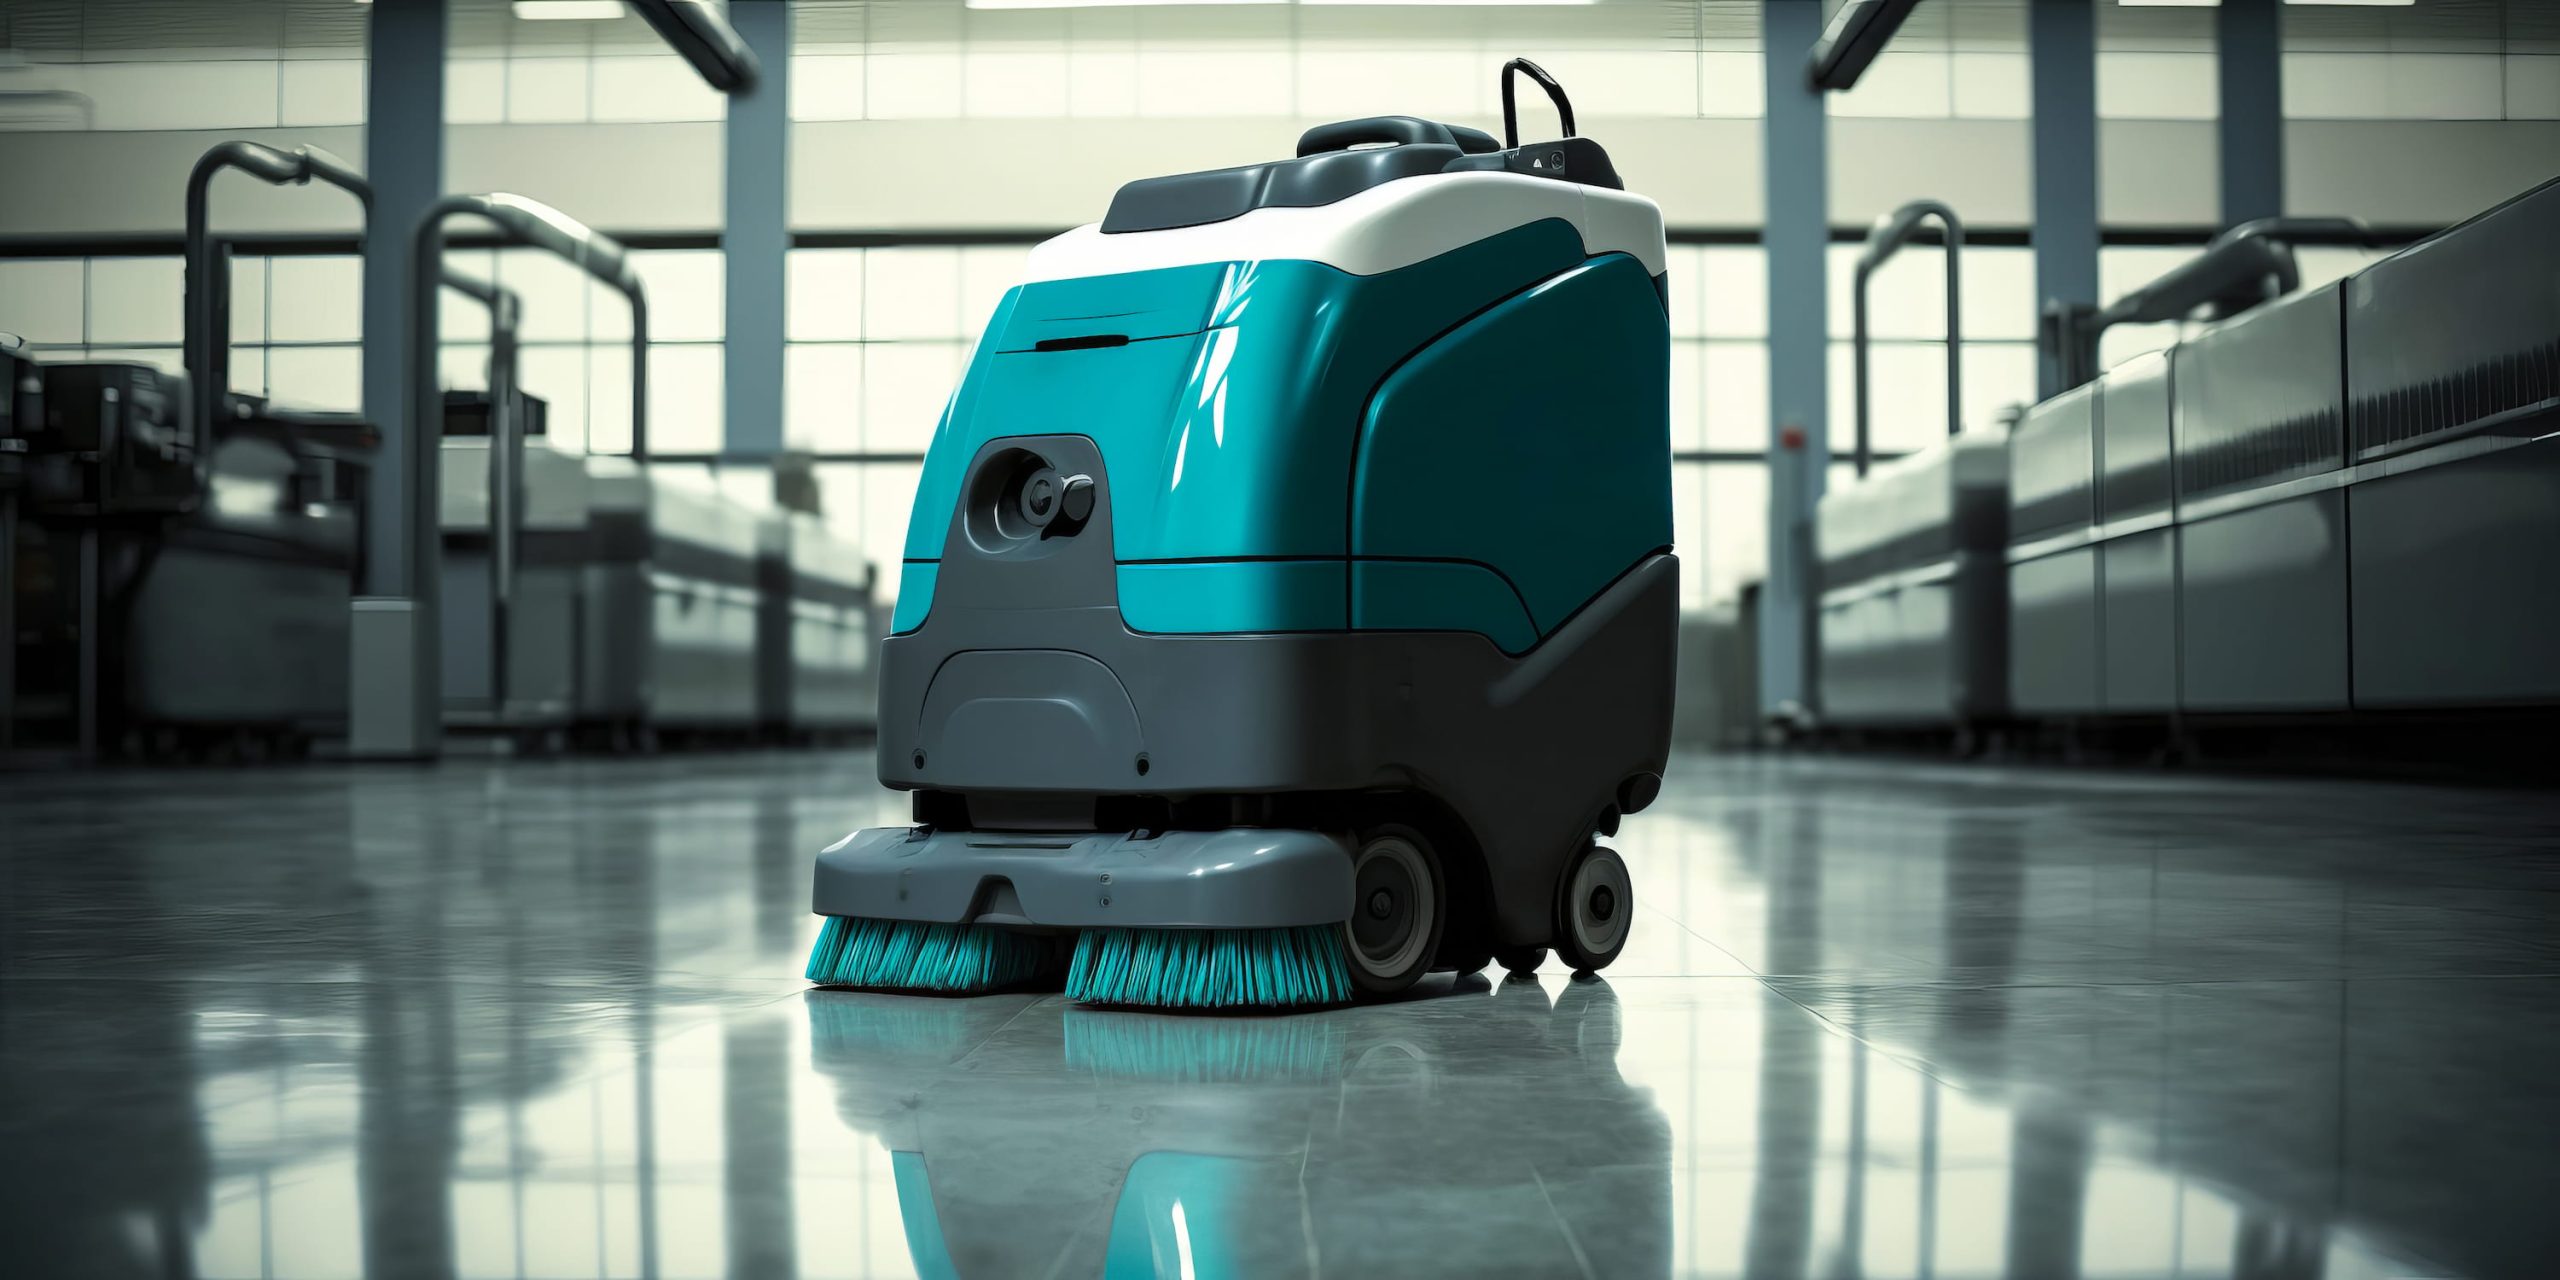 Blue and grey IOT robot vacuum cleaner in industrial setting